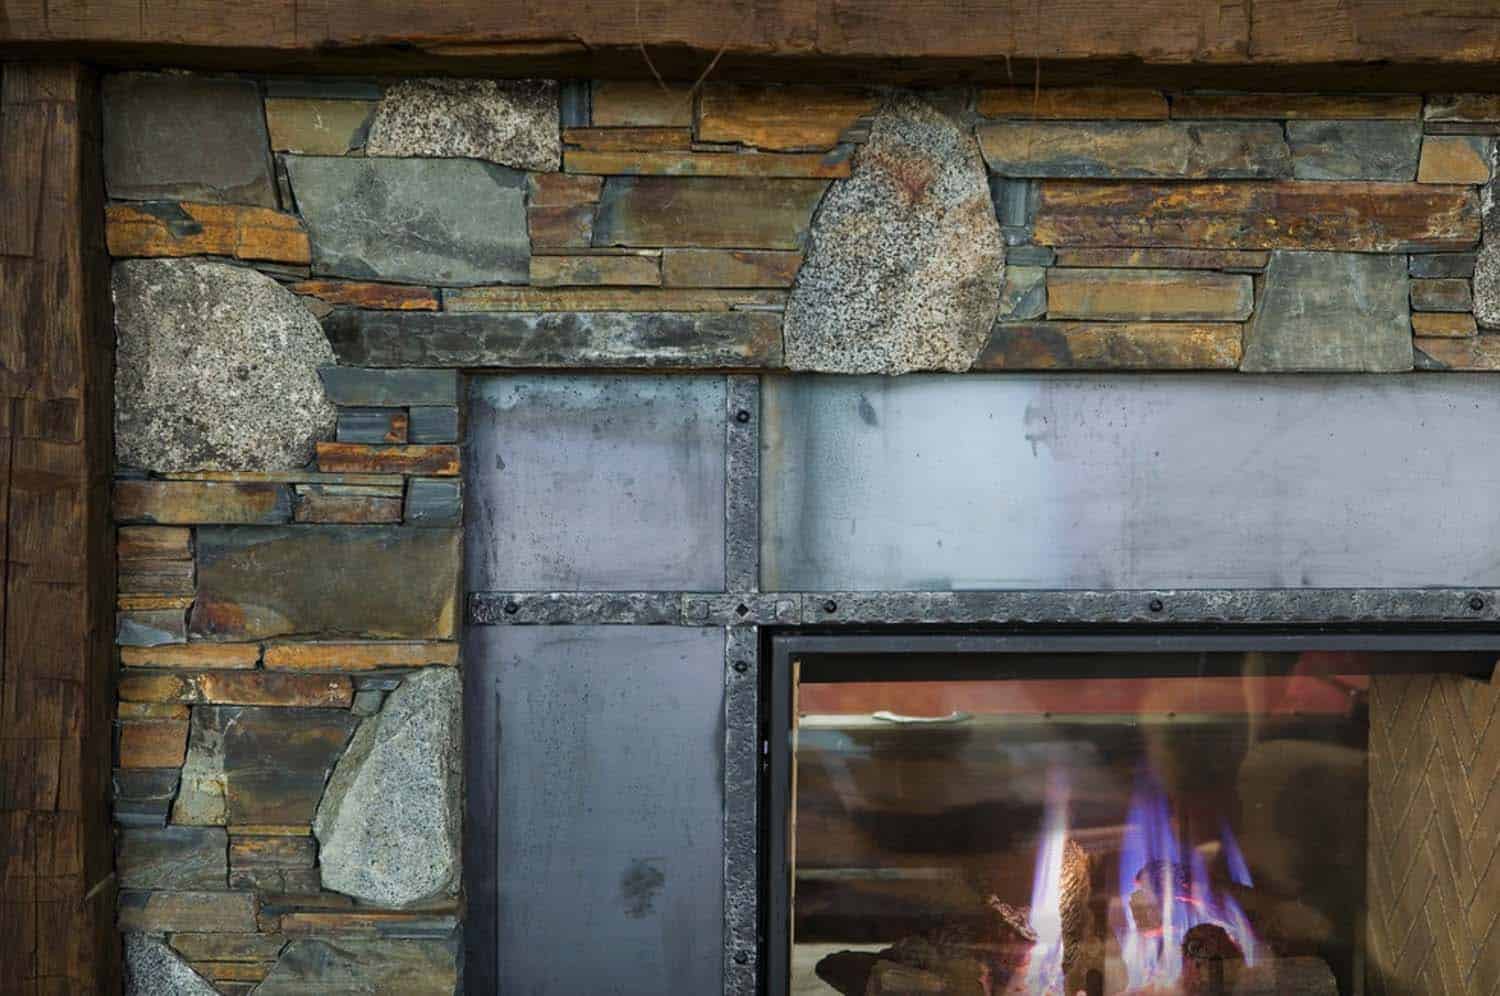 rustic-living-room-fireplace